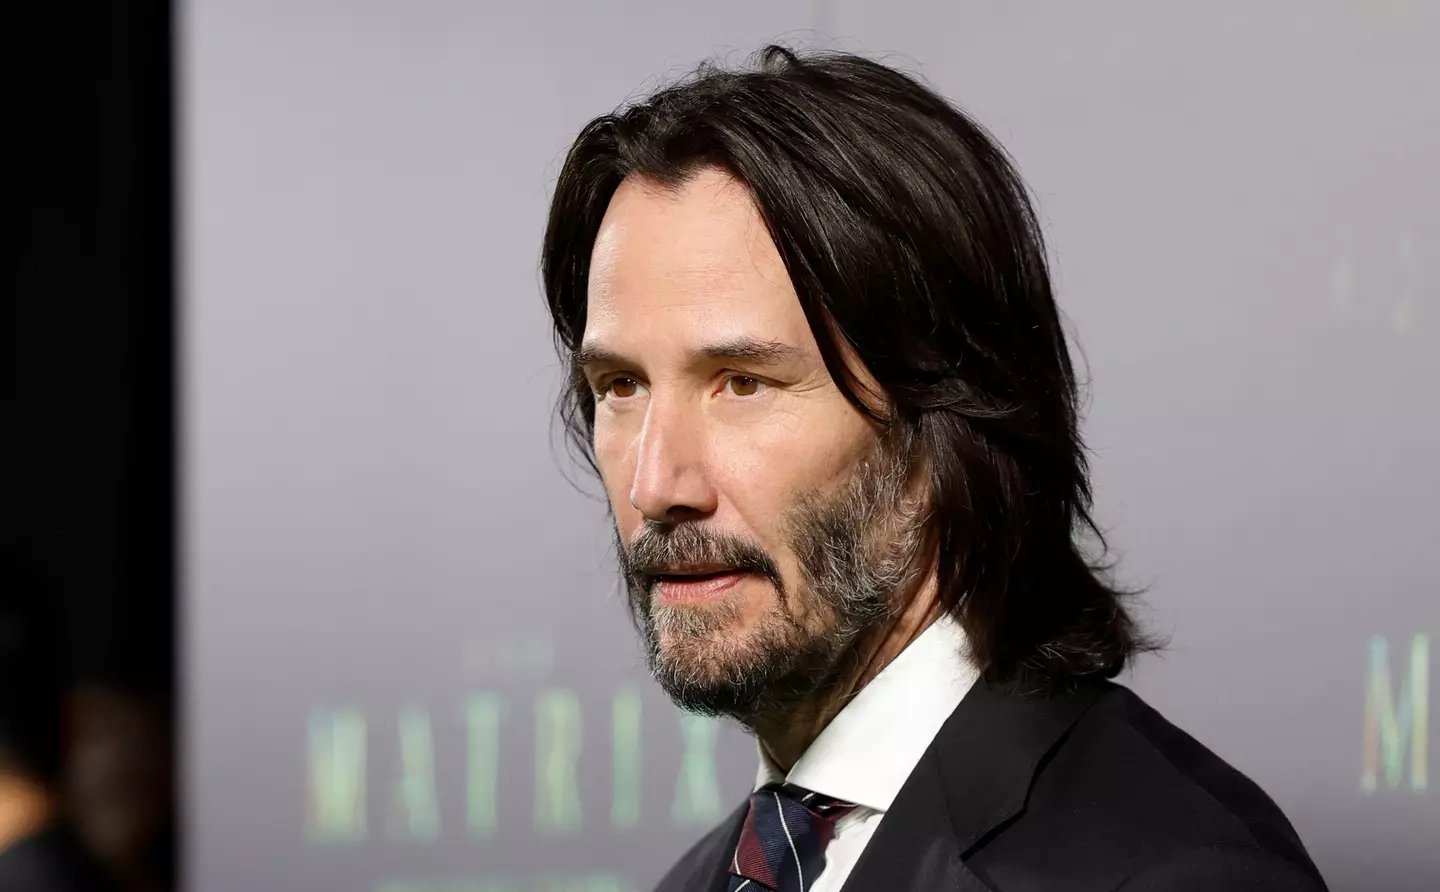 Keanu Reeves saw a ghost when he was a child.